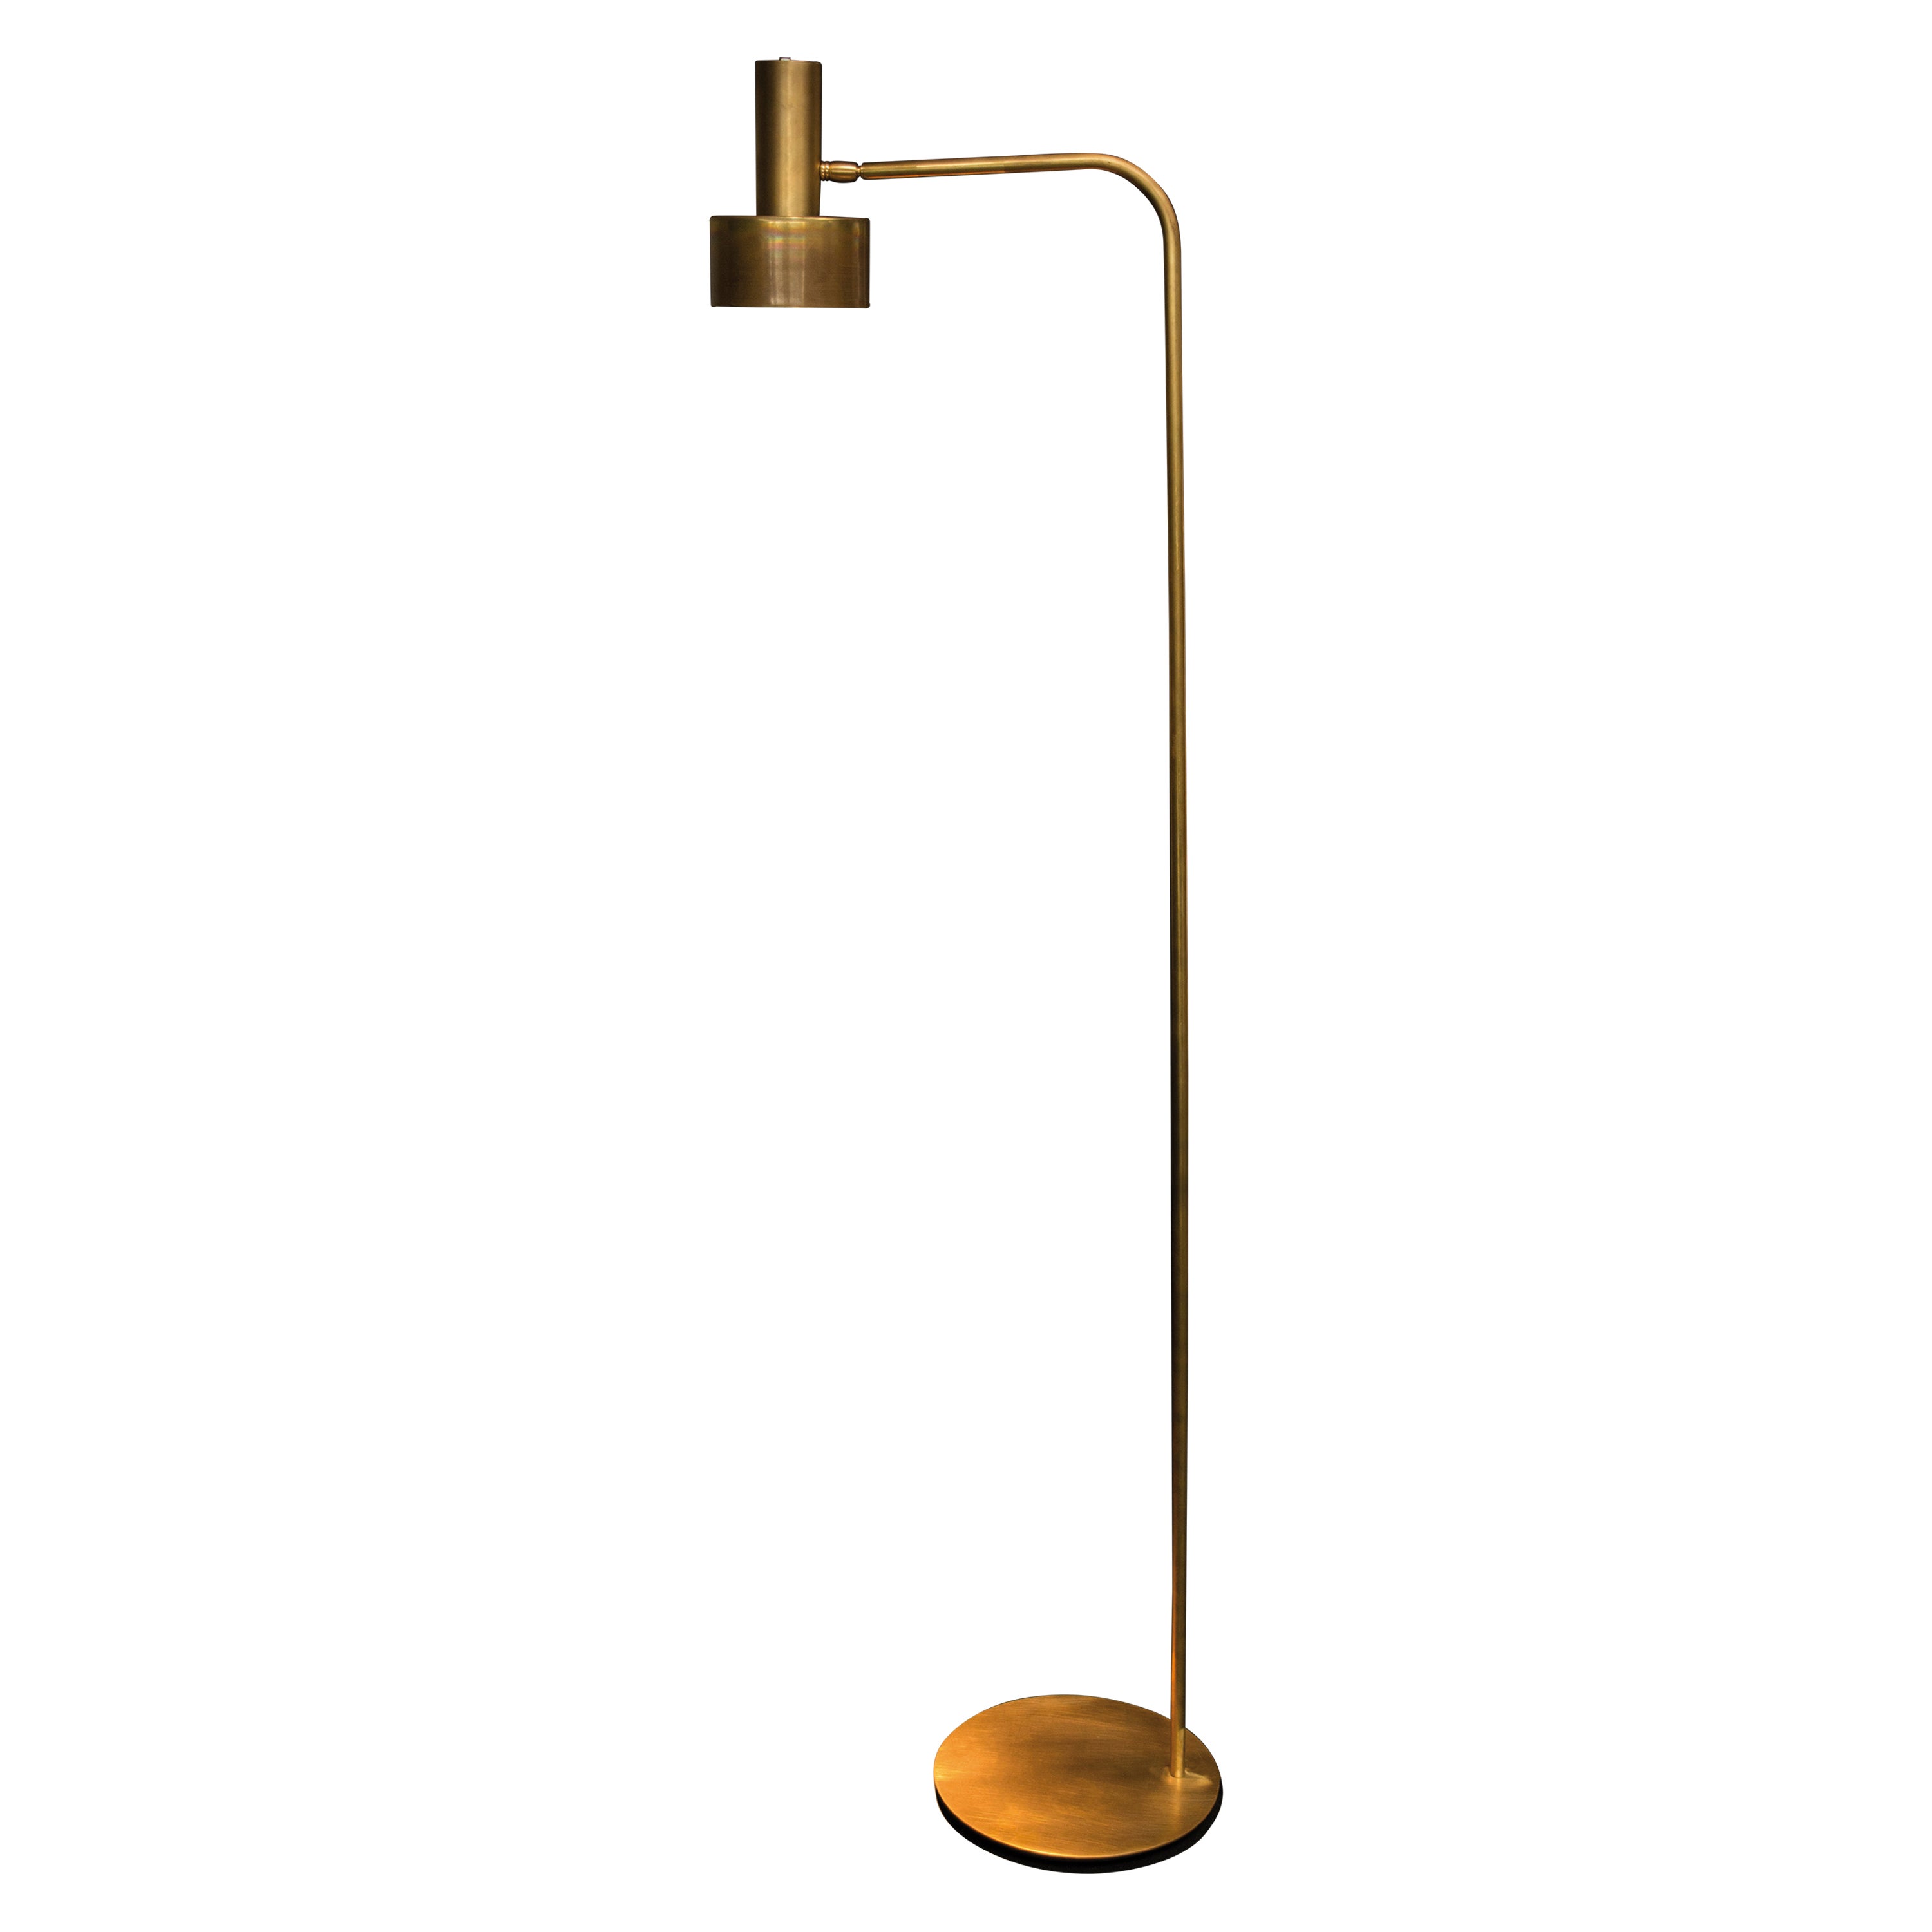 Natural Brass Contemporary-Modern Floor Lamp Handcrafted in Italy by 247lab For Sale